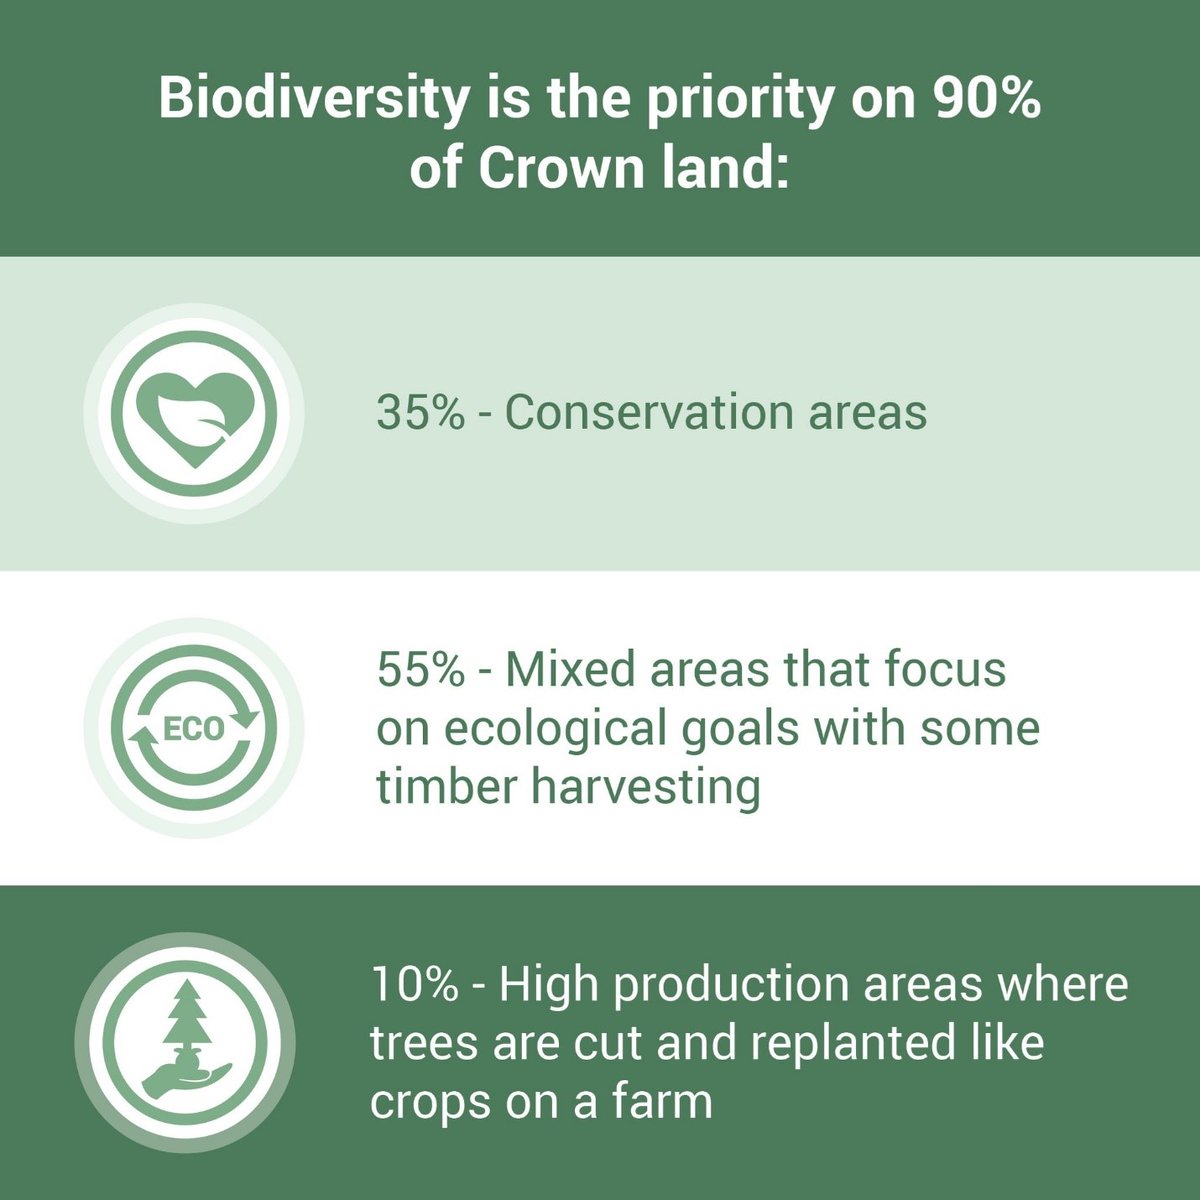 Happy Biodiversity Day! Our approach for ecological forestry divides crown land into 3 zones that work together to balance biodiversity and other goals. Learn more about ecological forestry: novascotia.ca/ecological-for…